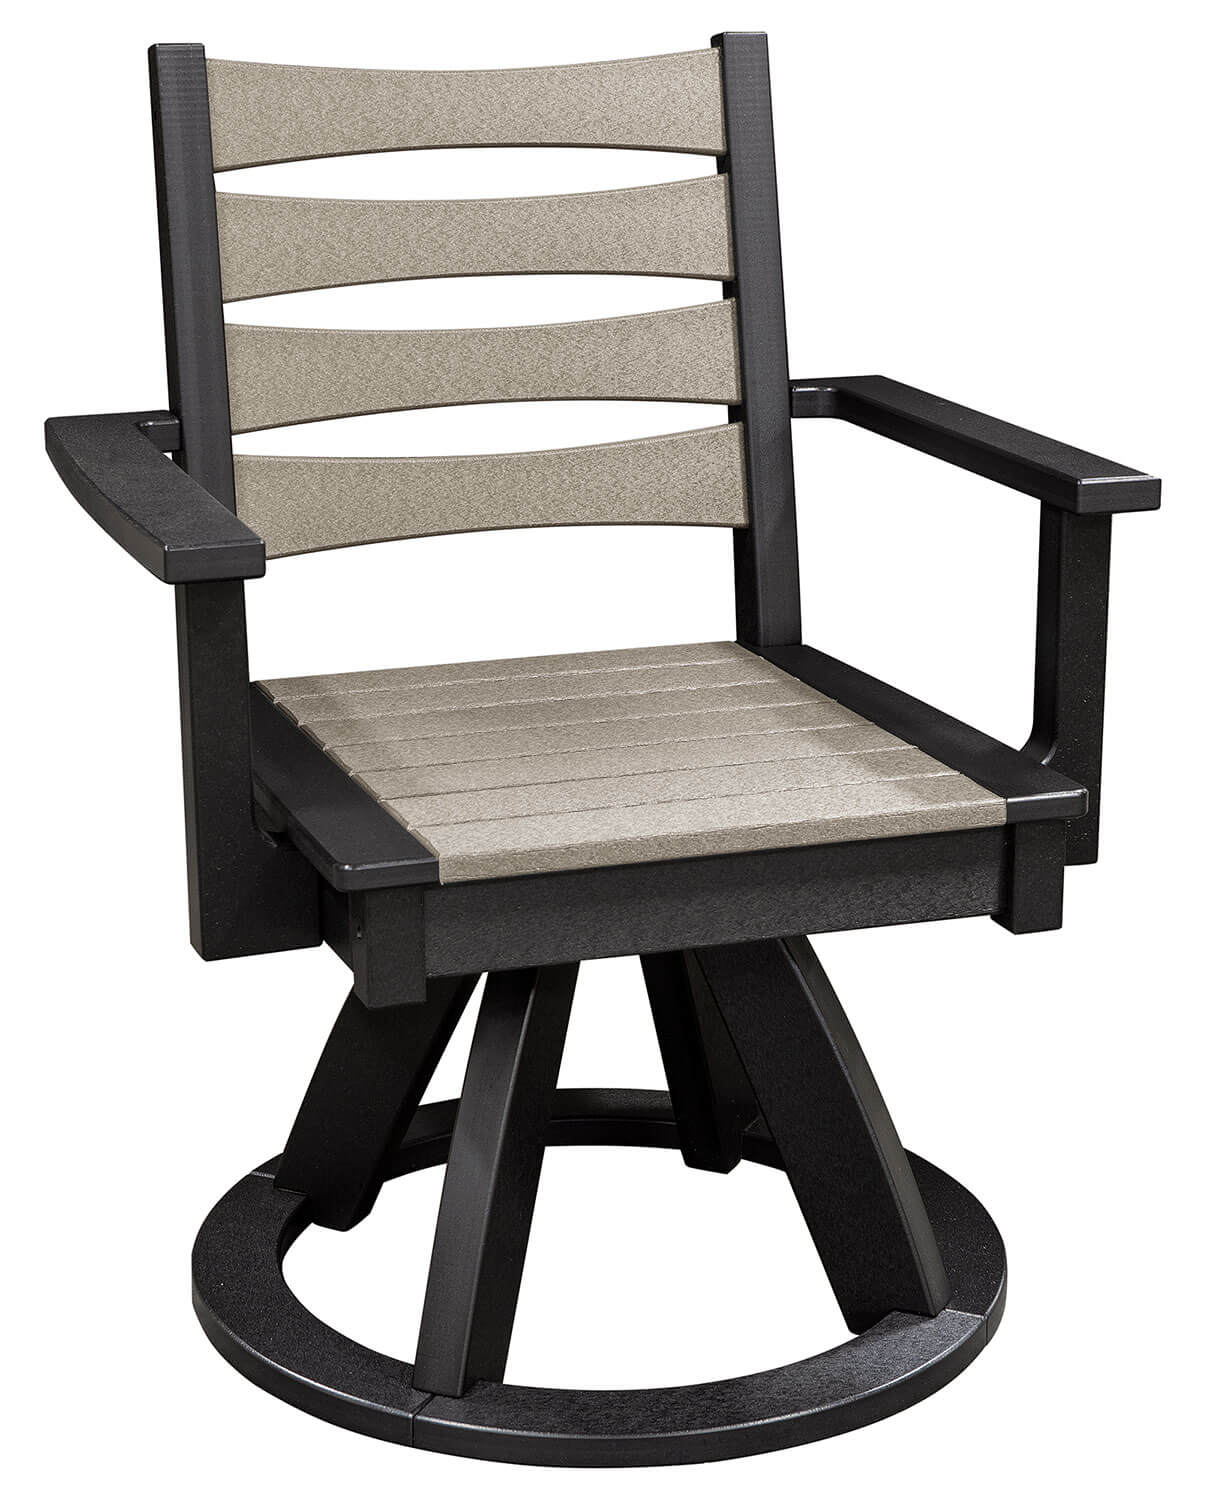 EC Woods Tacoma Outdoor Poly Dining Height Swivel Chair Shown in Light Gray and Black